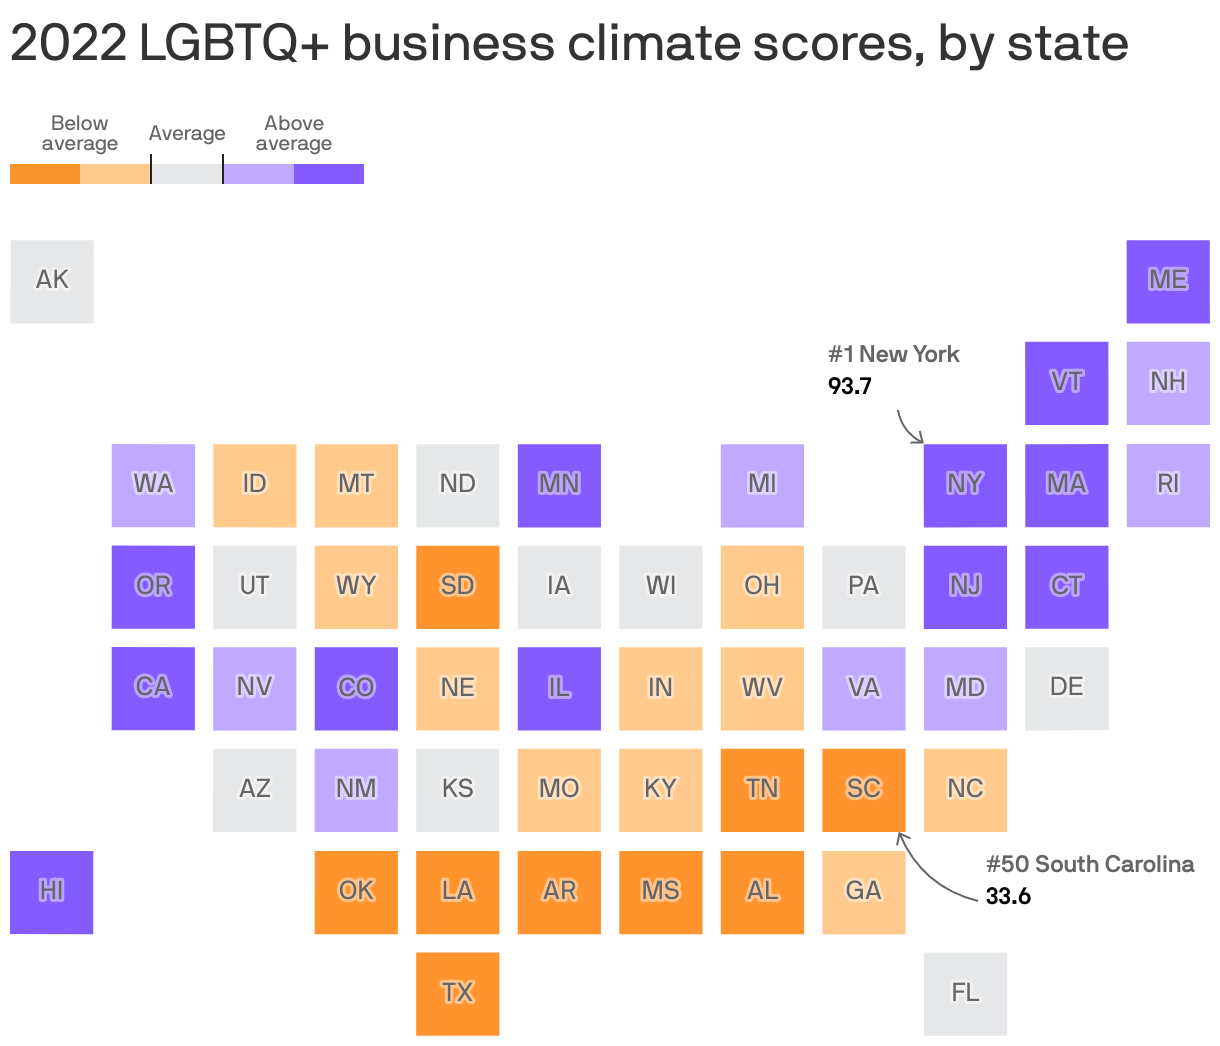 2022 LGBTQ+ business climate scores, by state